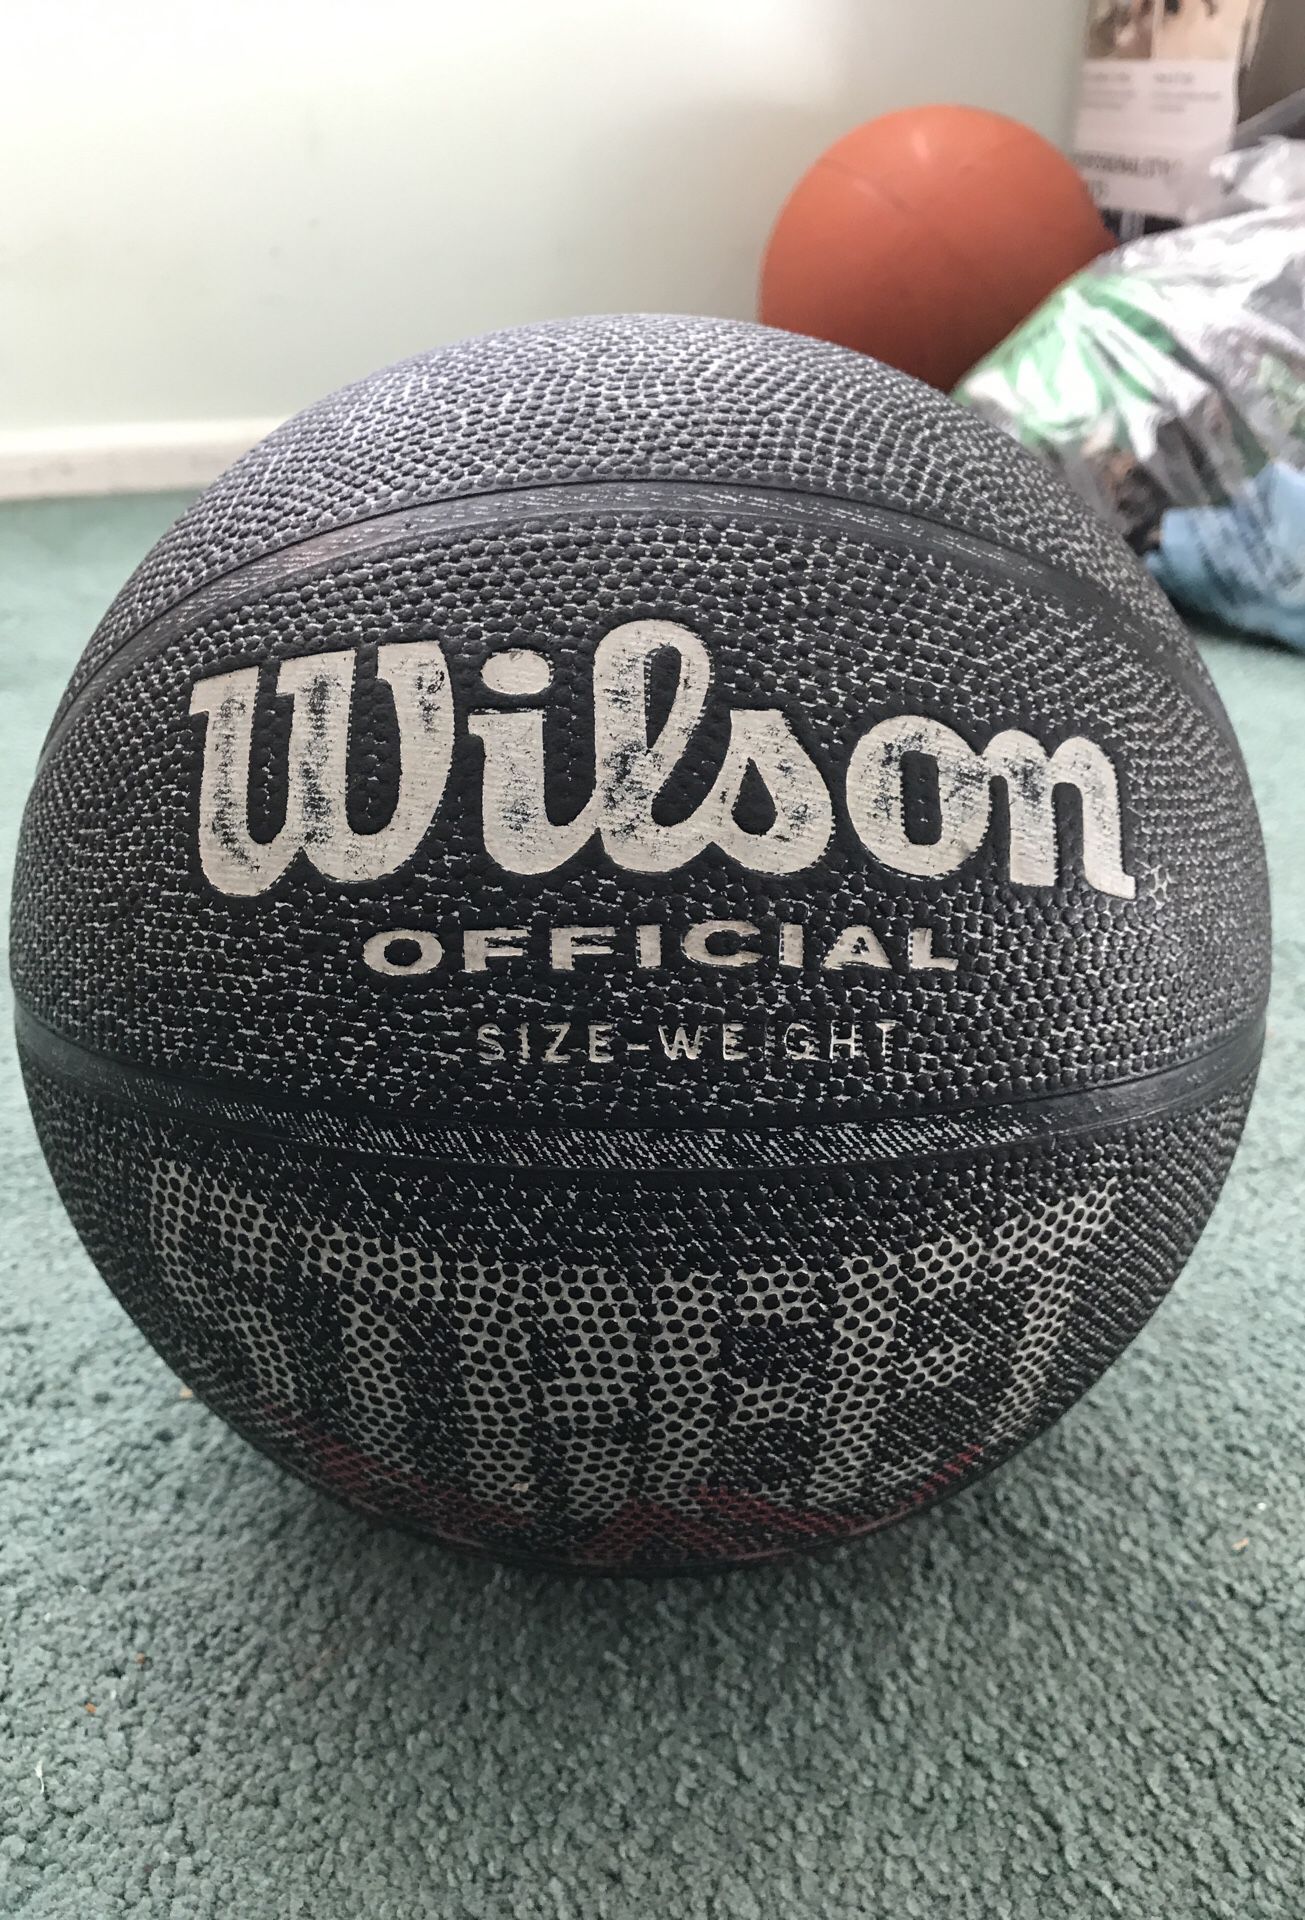 This Wilson basketball was used but is still in a new condition.